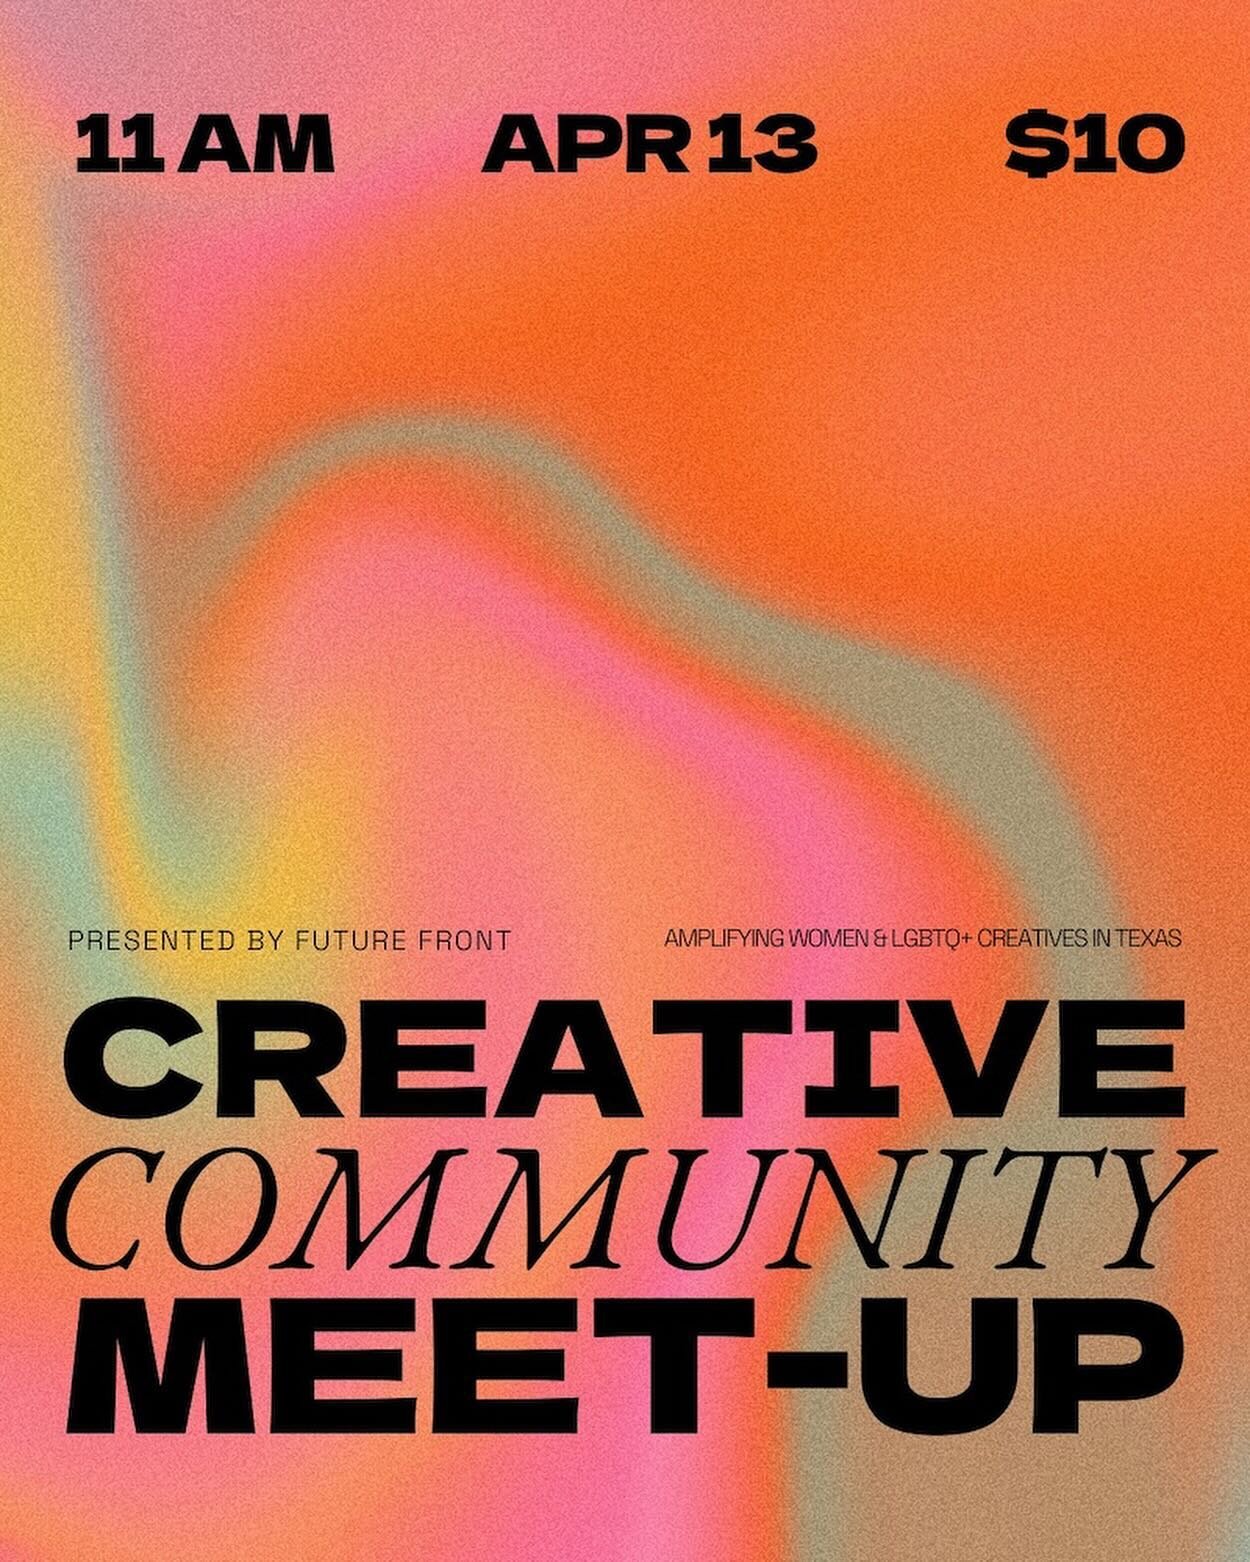 Our first meet-up of the year 📍 We&rsquo;ll be open next Saturday at The Future Front House for some community time!

Whether you&rsquo;re new around here or have been here a while, come say hi. This month&rsquo;s special guests include:

❤️&zwj;🔥 